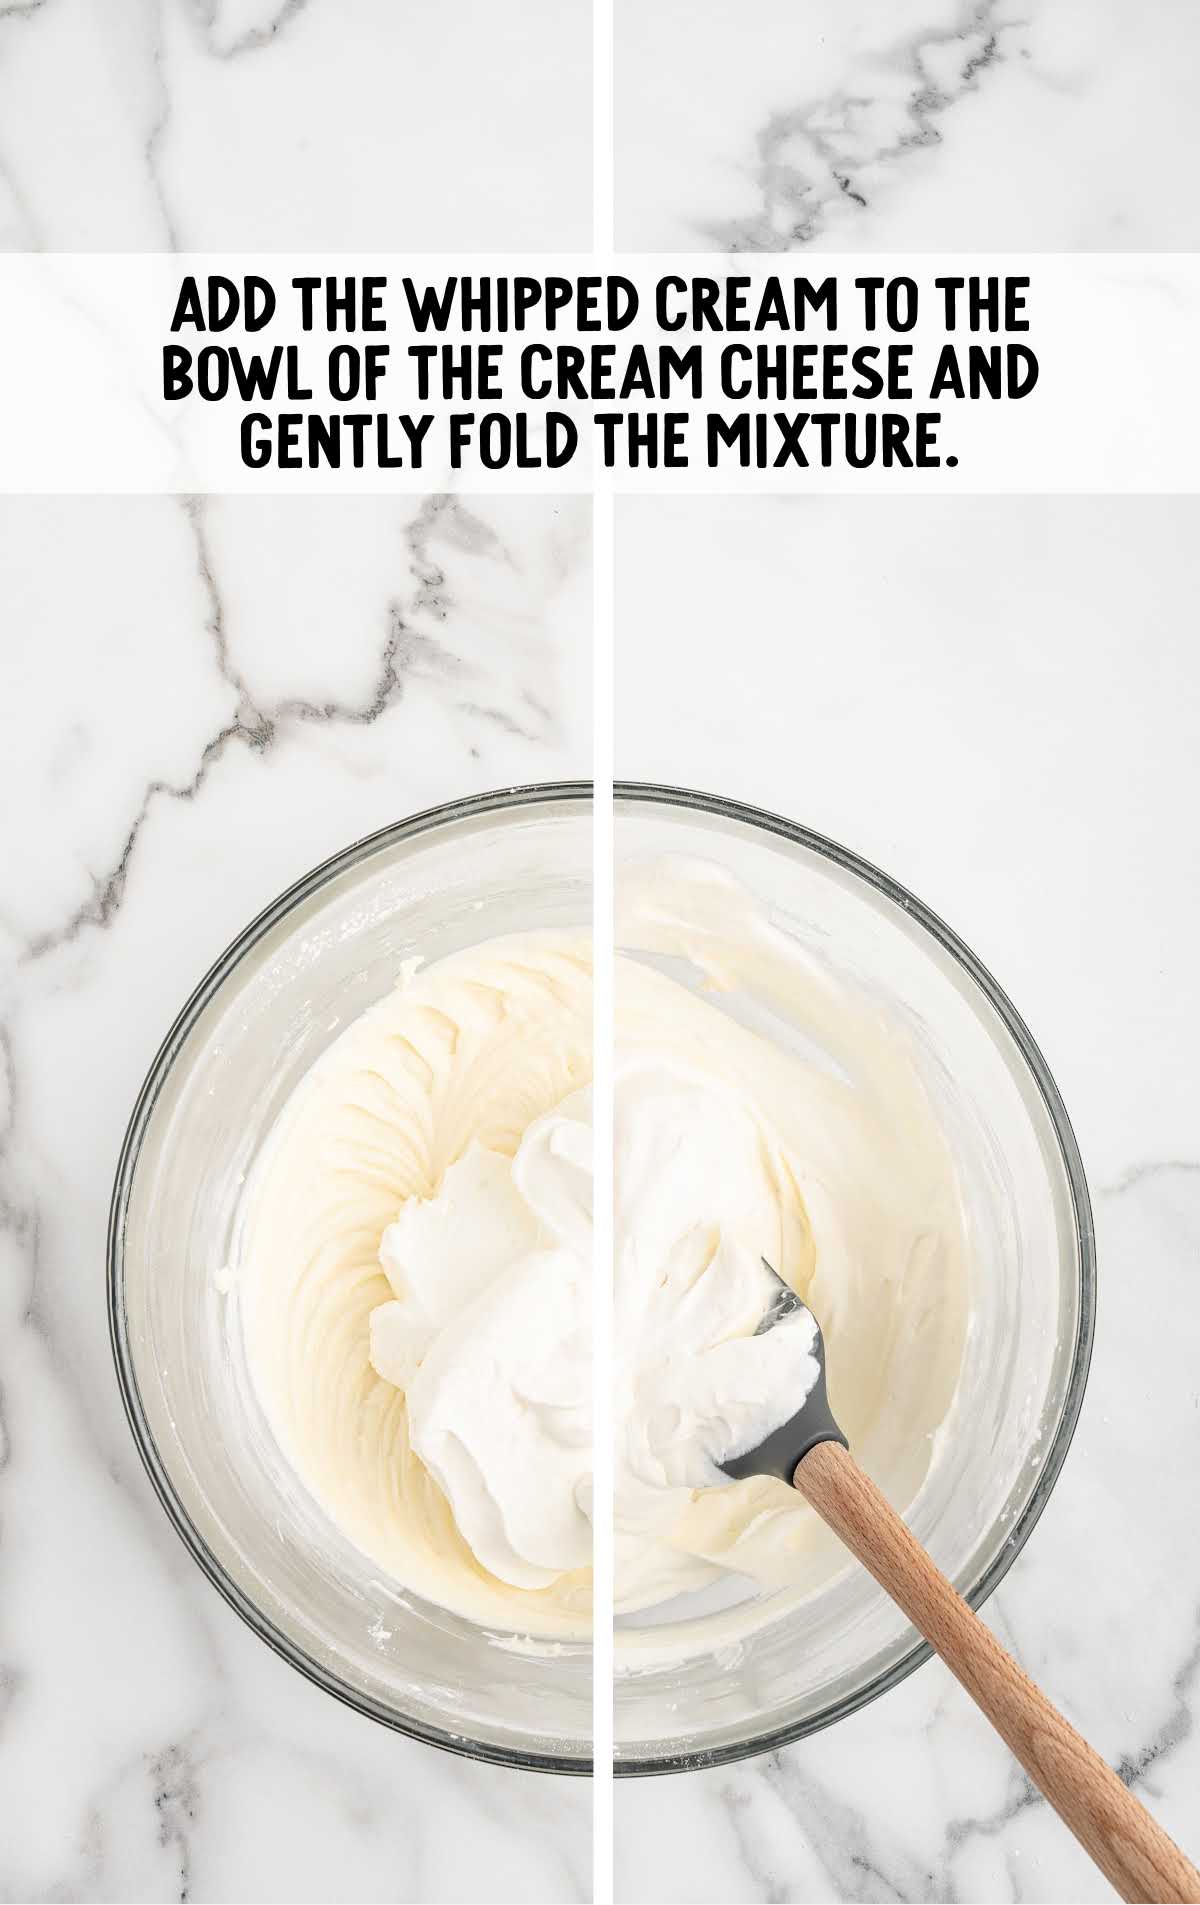 whipped cream folded into the cream cheese mixture